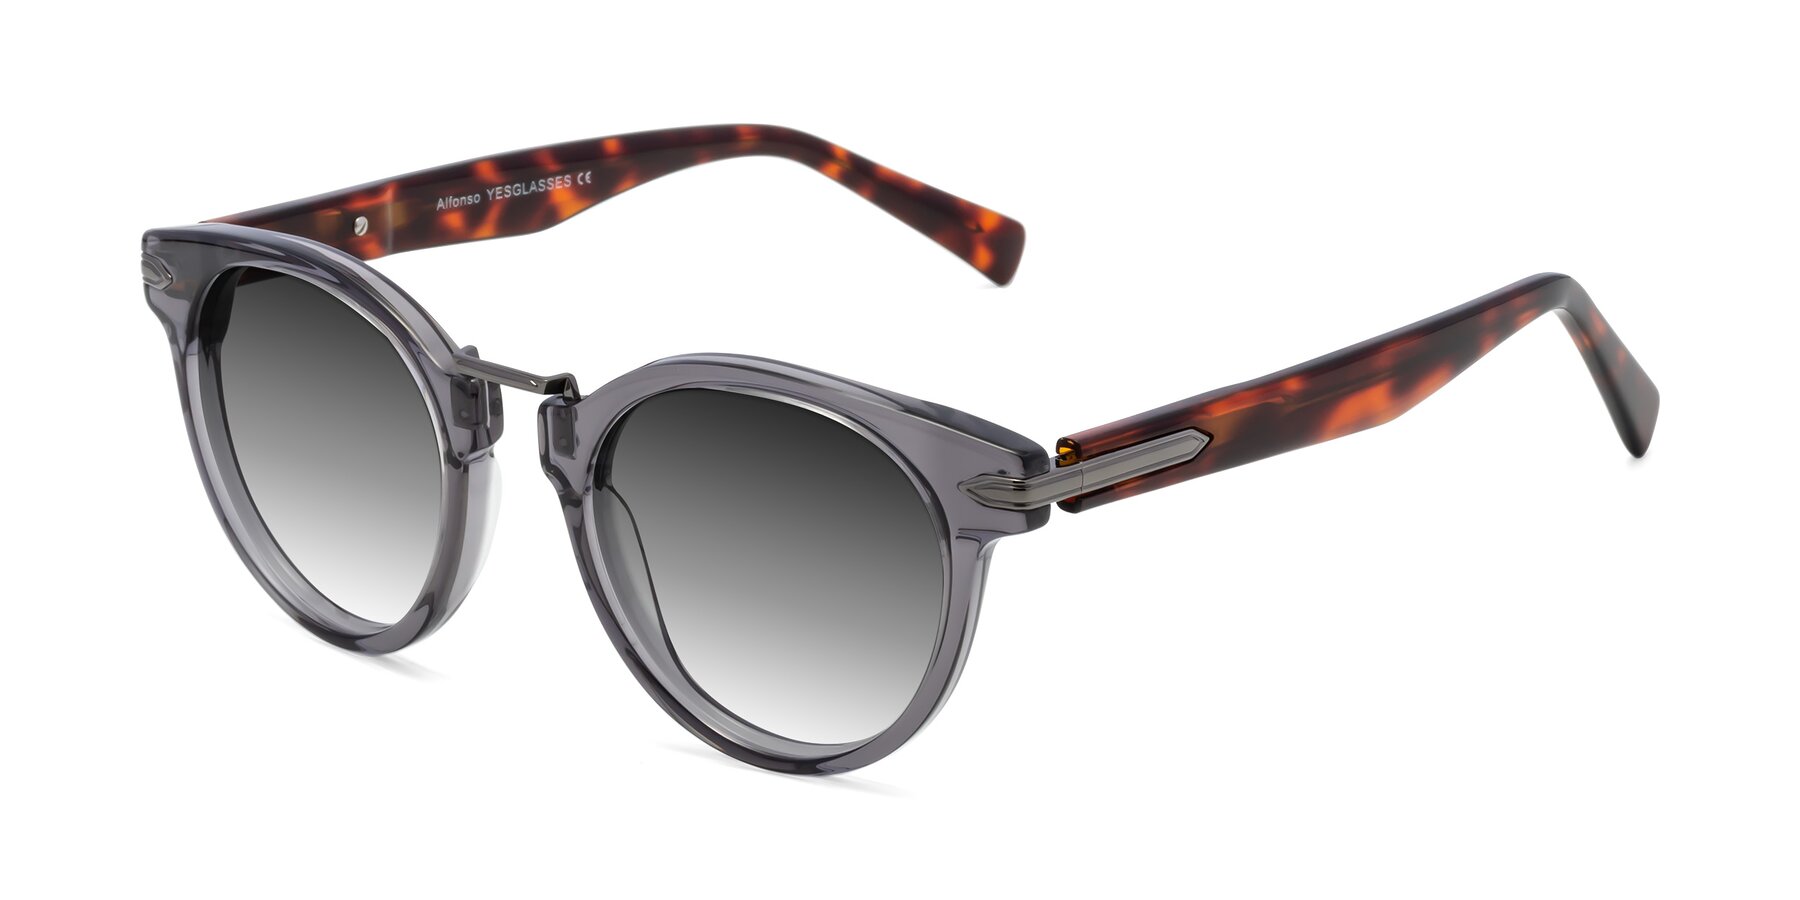 Angle of Alfonso in Gray /Tortoise with Gray Gradient Lenses